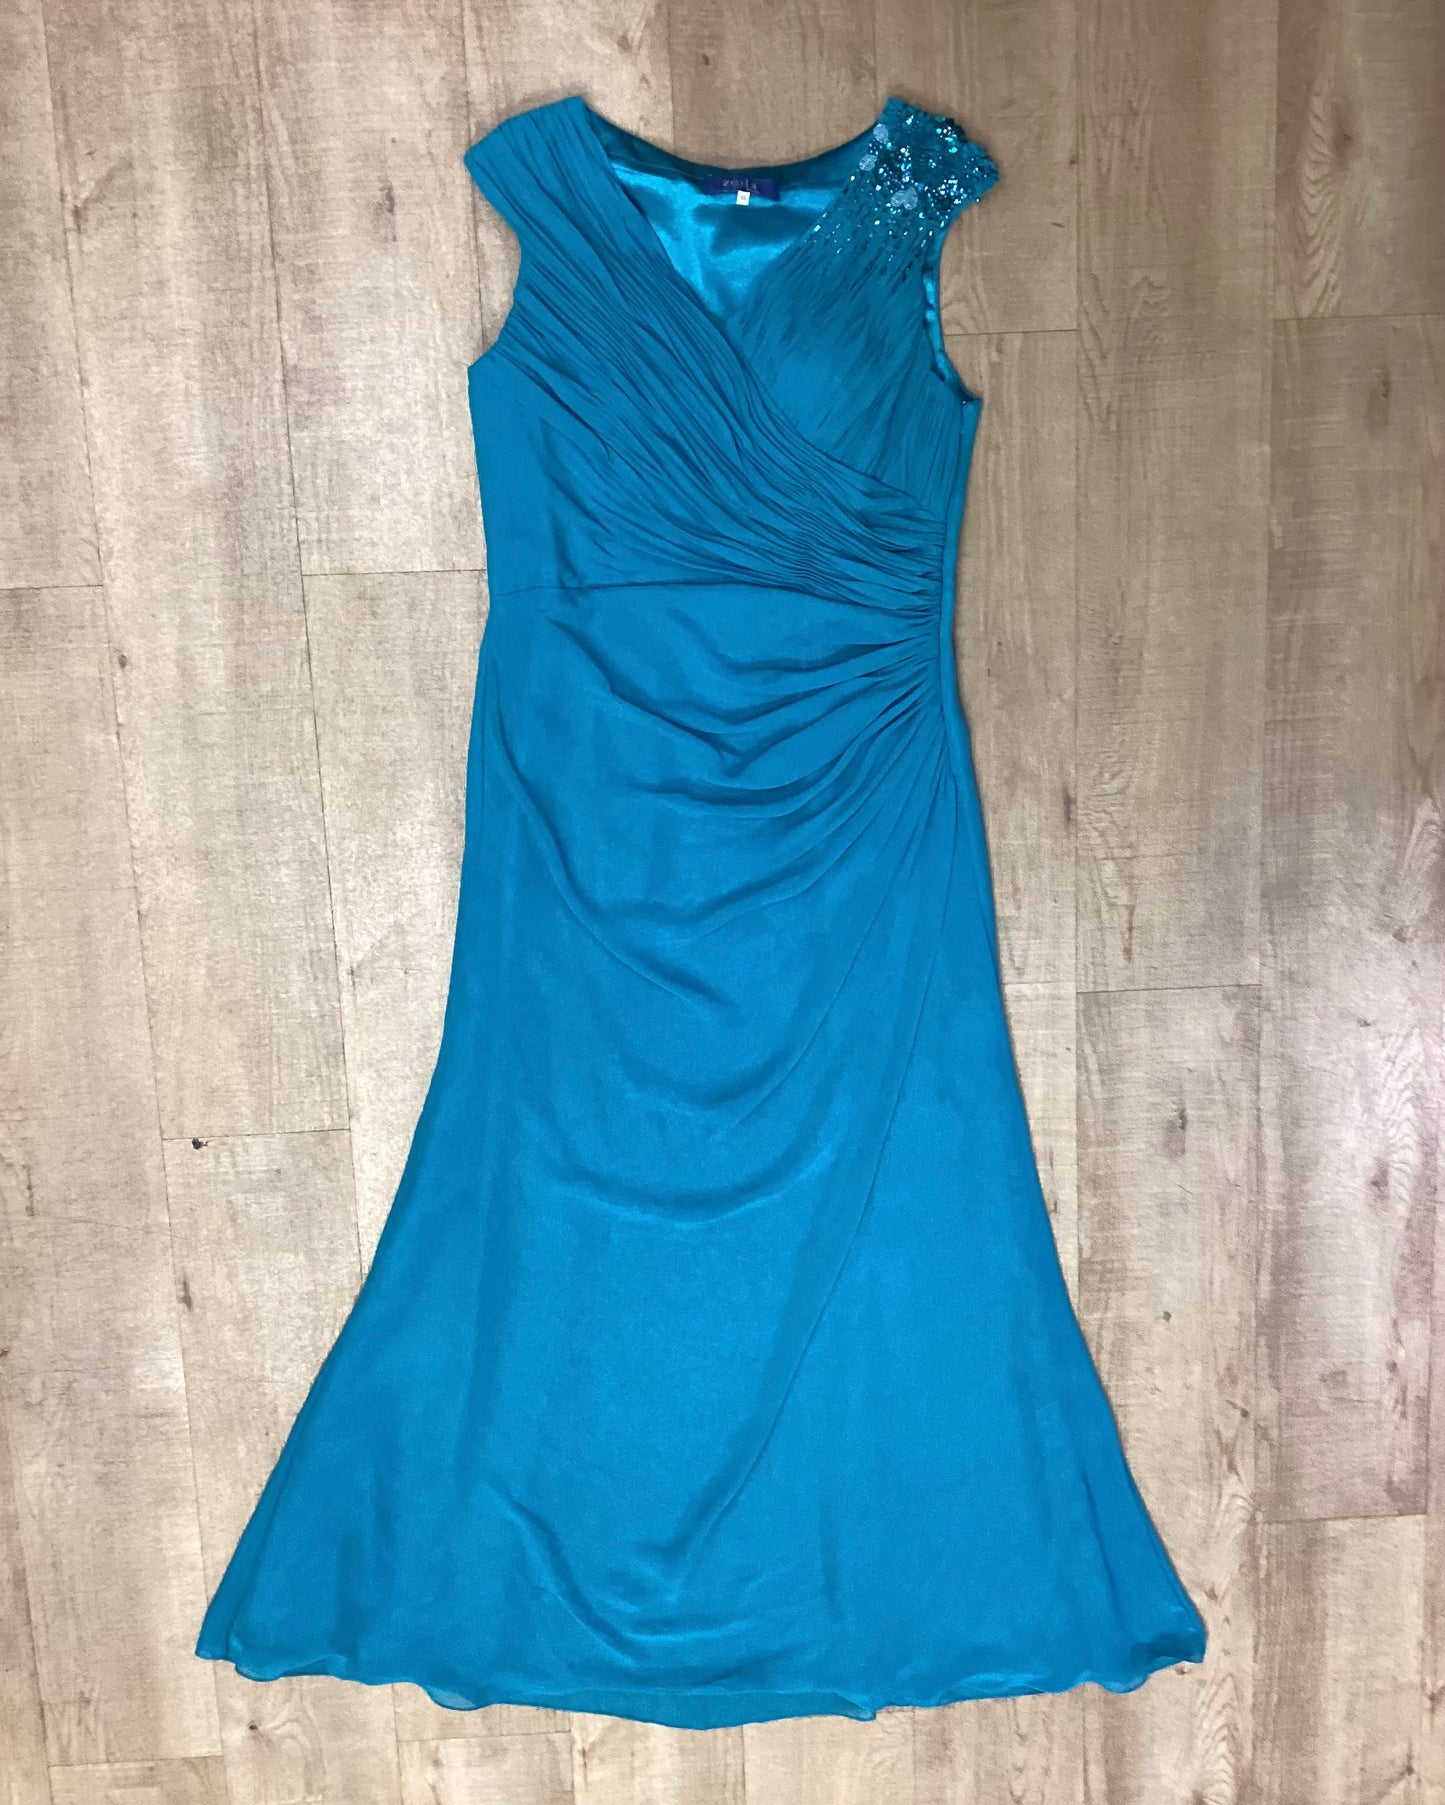 Zeila Dona Blue Gown with bead and sequin detail Size L